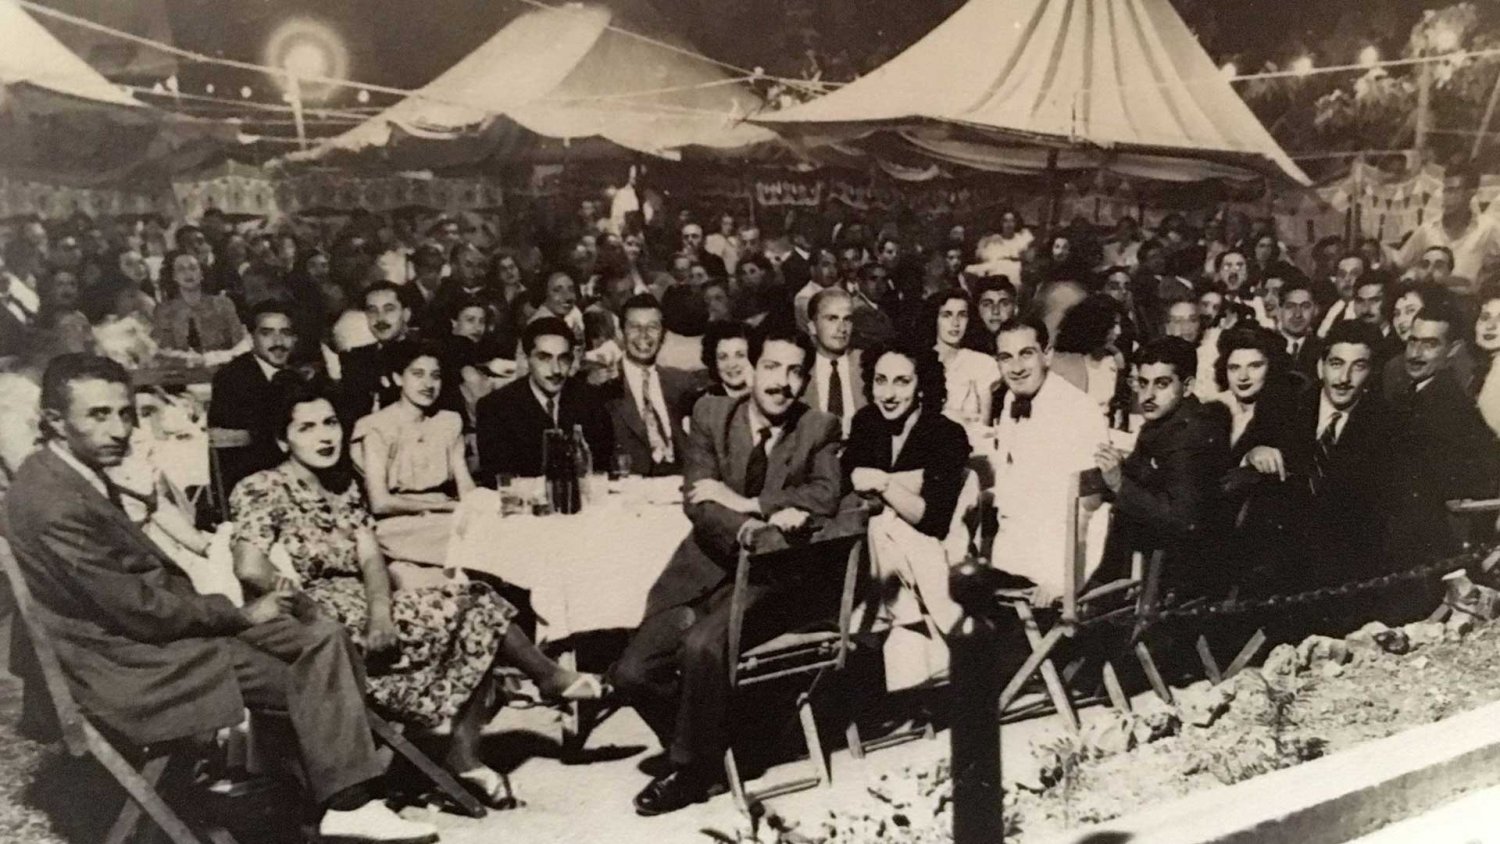 Dinner party under the stars at the Jerusalem YMCA, June 1947